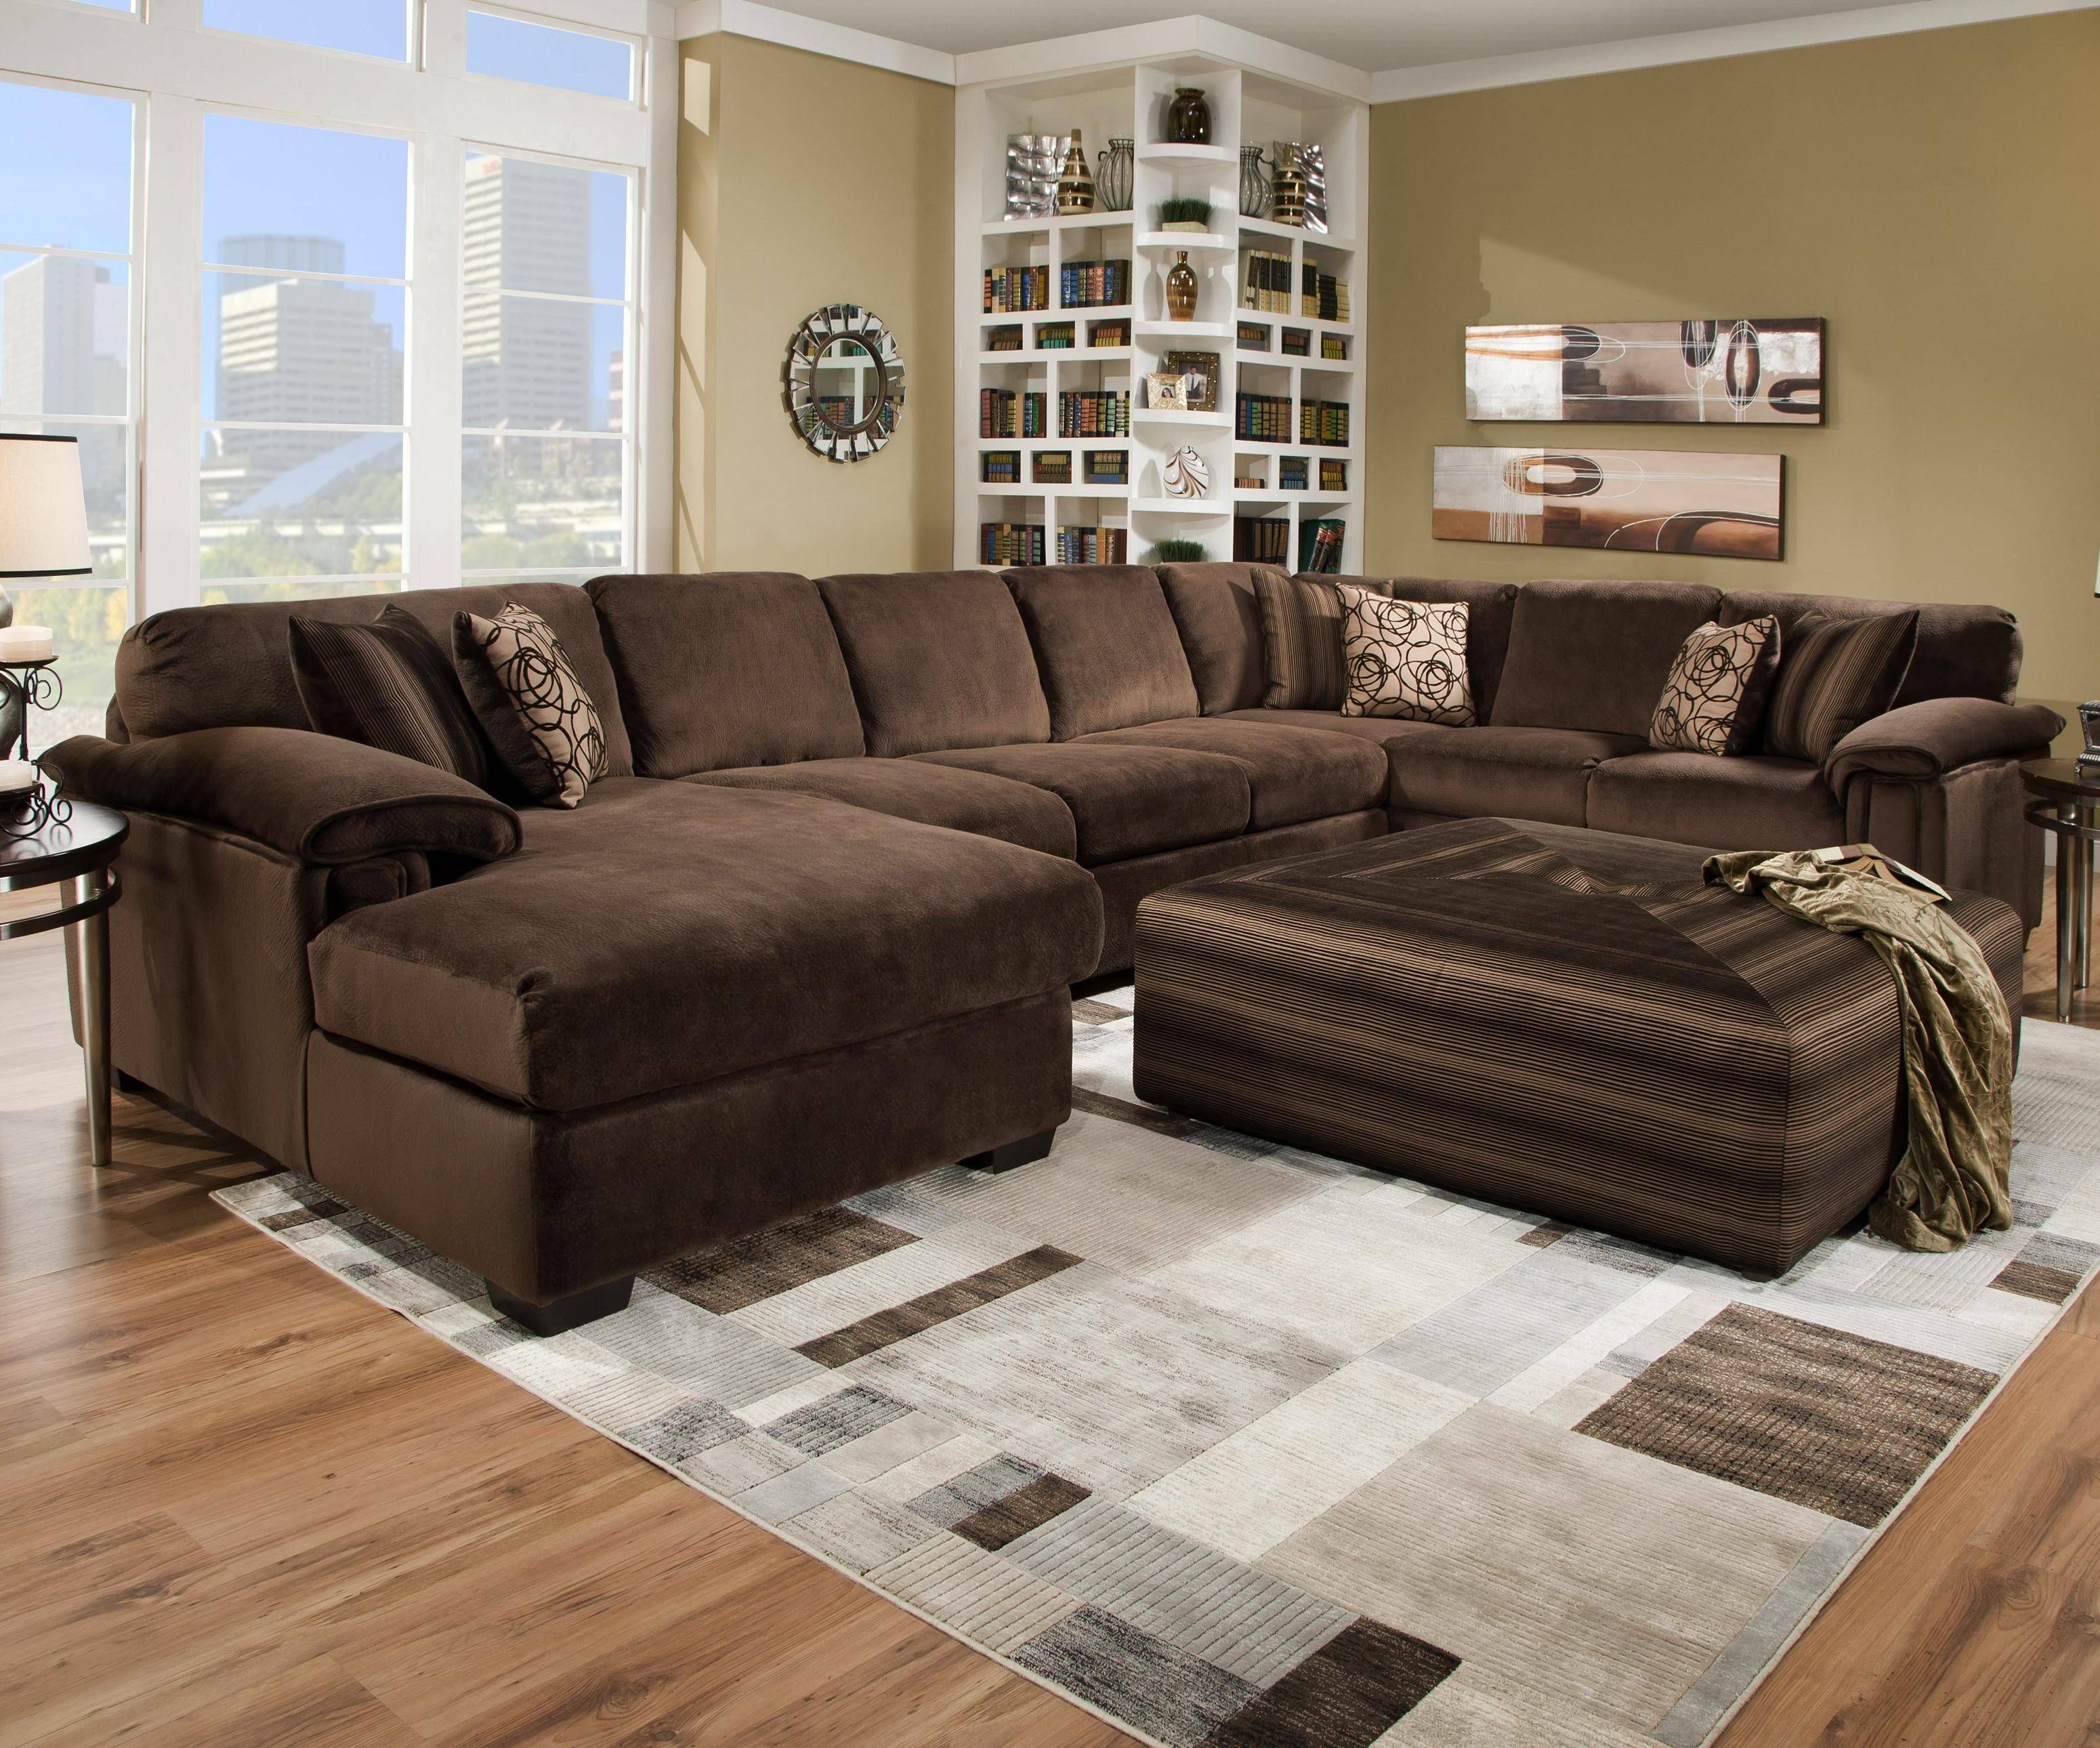 Sofas: Oversized Sofas That Are Ready For Hours Of Lounging Time Throughout 10 Piece Sectional Sofa (View 29 of 30)